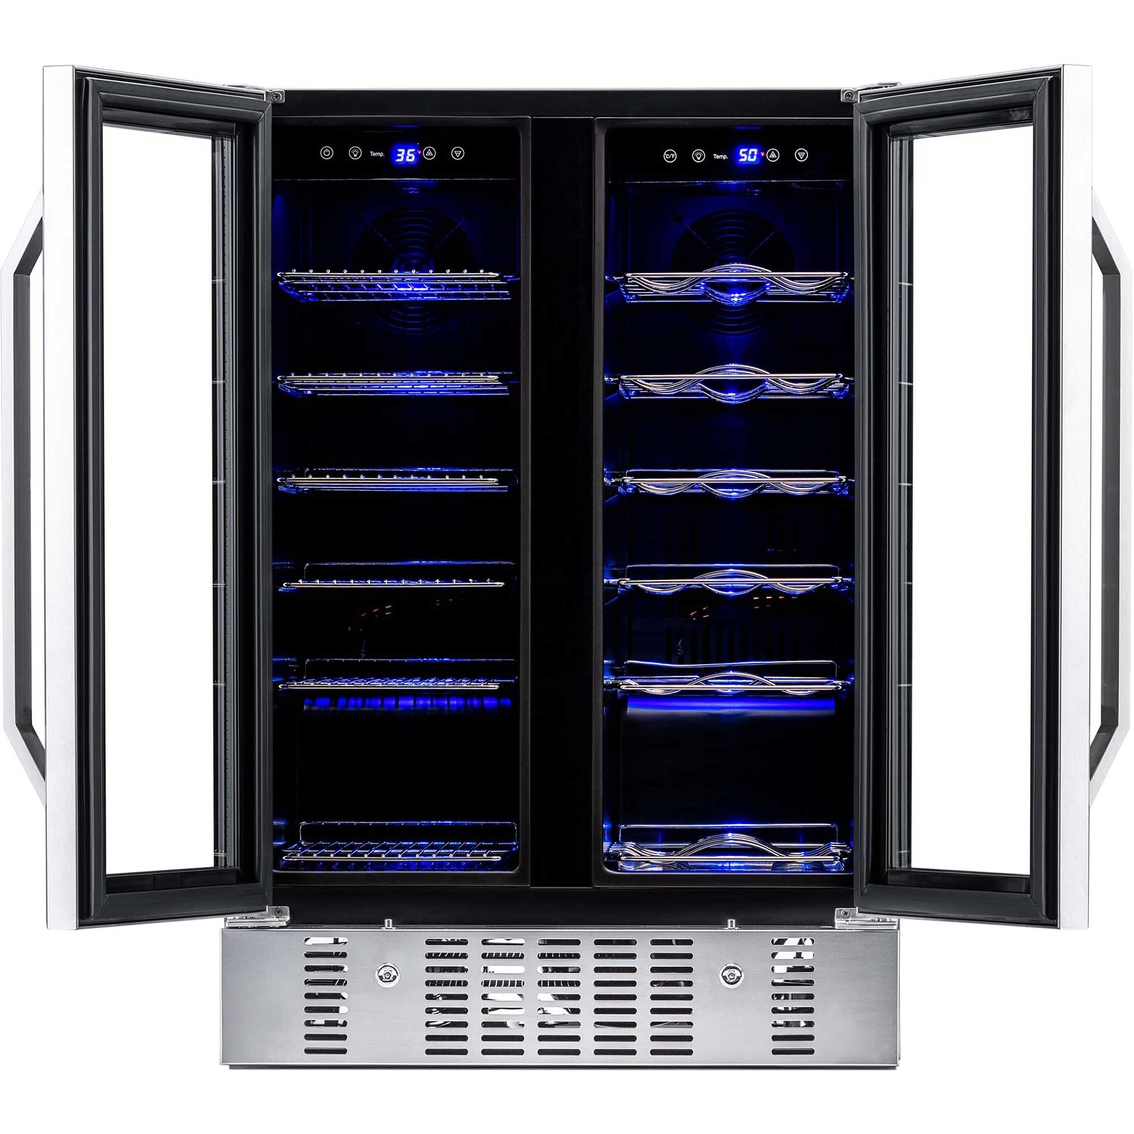 NewAir 24 in. Built-in Dual Zone 18 Bottle and 58 Can Wine and Beverage Cooler - Image 4 of 10